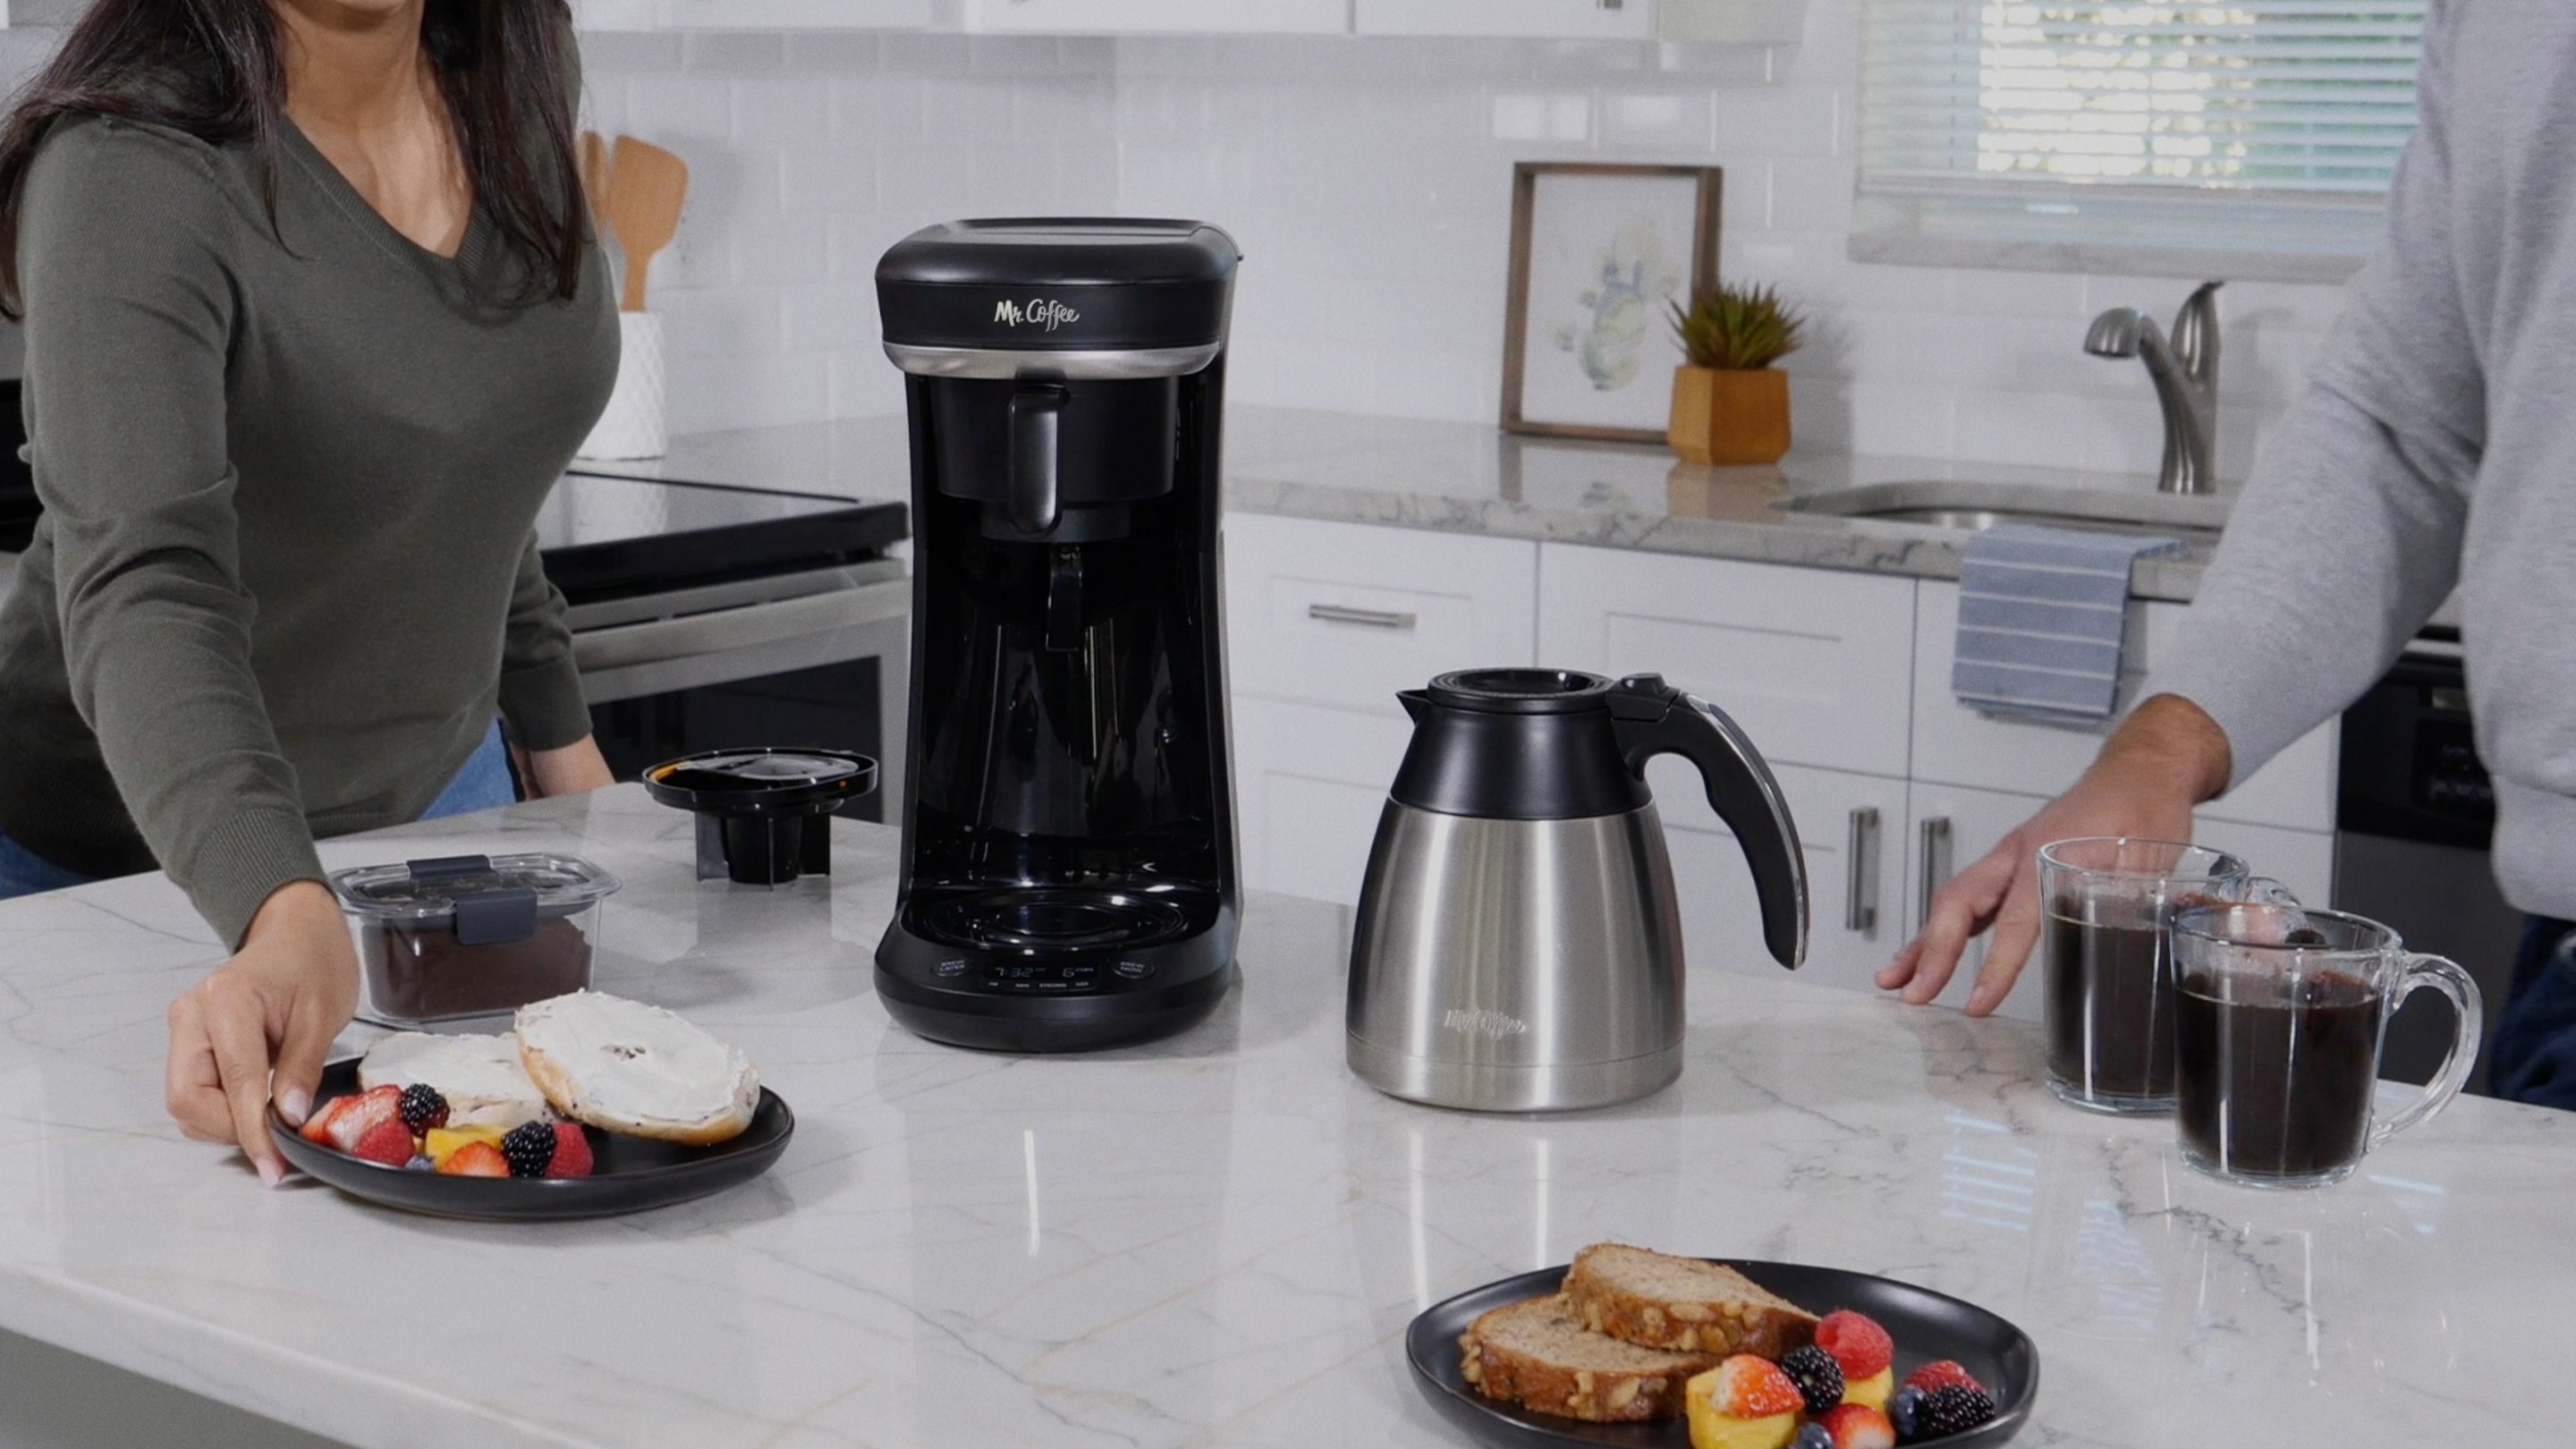 coffee maker with thermal carafe in kitchen with people and breakfast foods